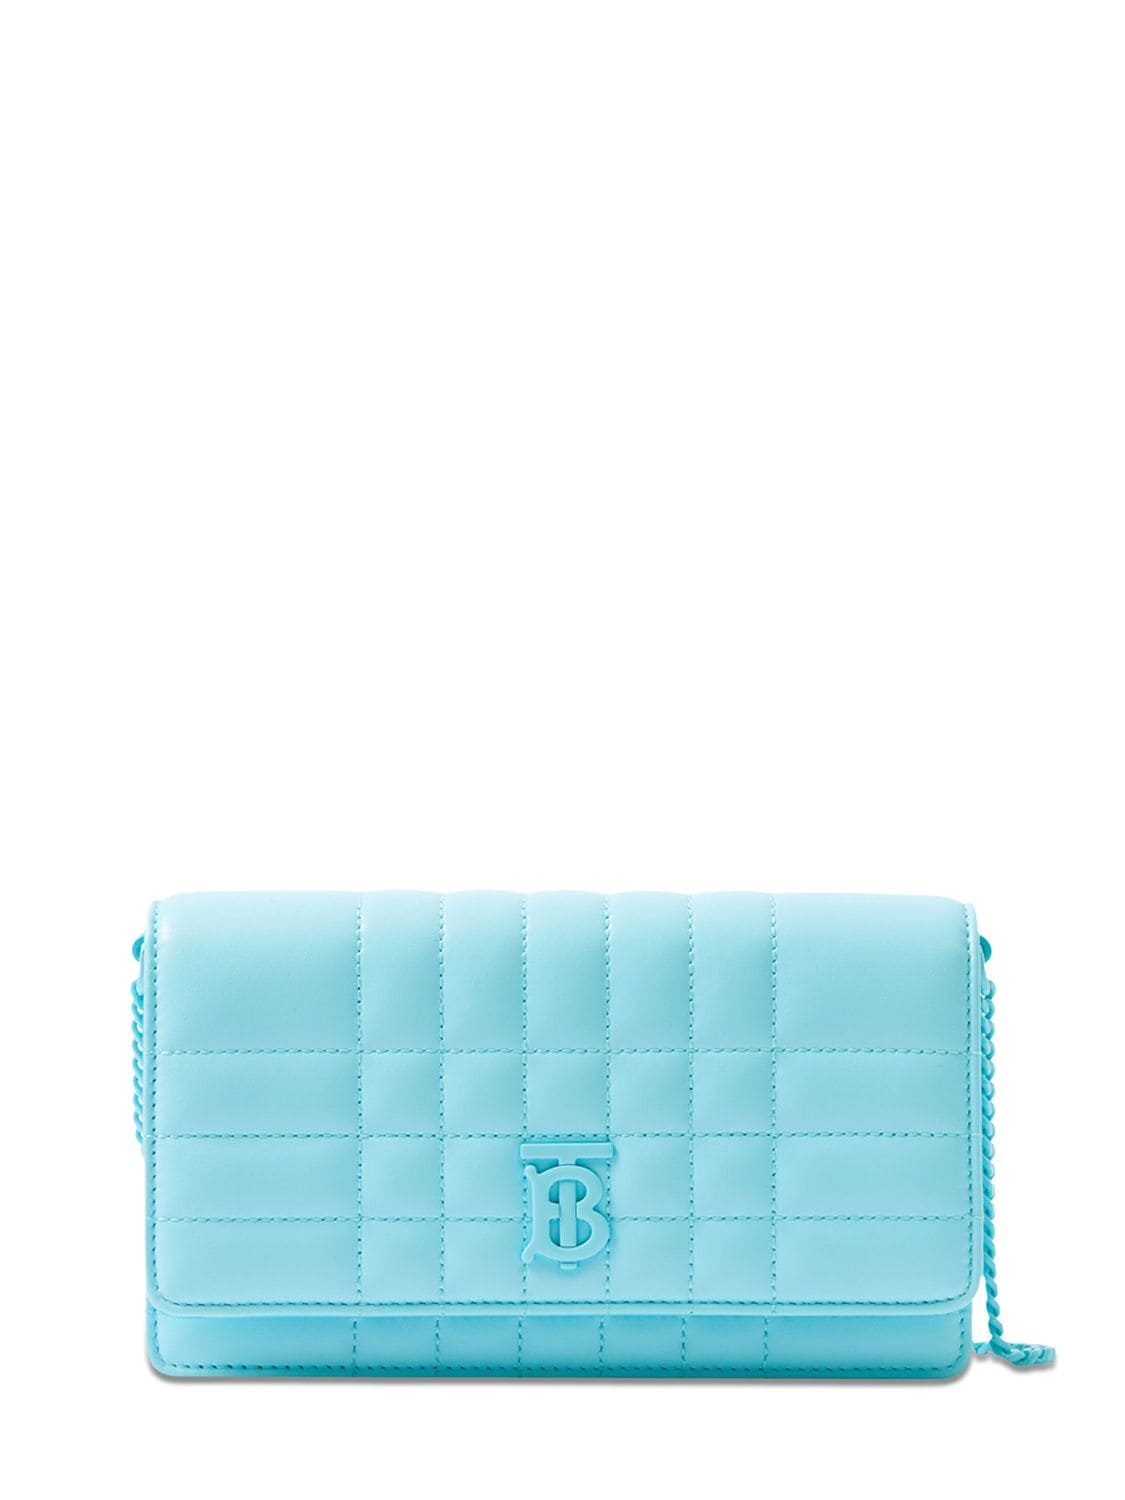 Quilted Leather Lola Card Case in Cool Sky Blue - Women